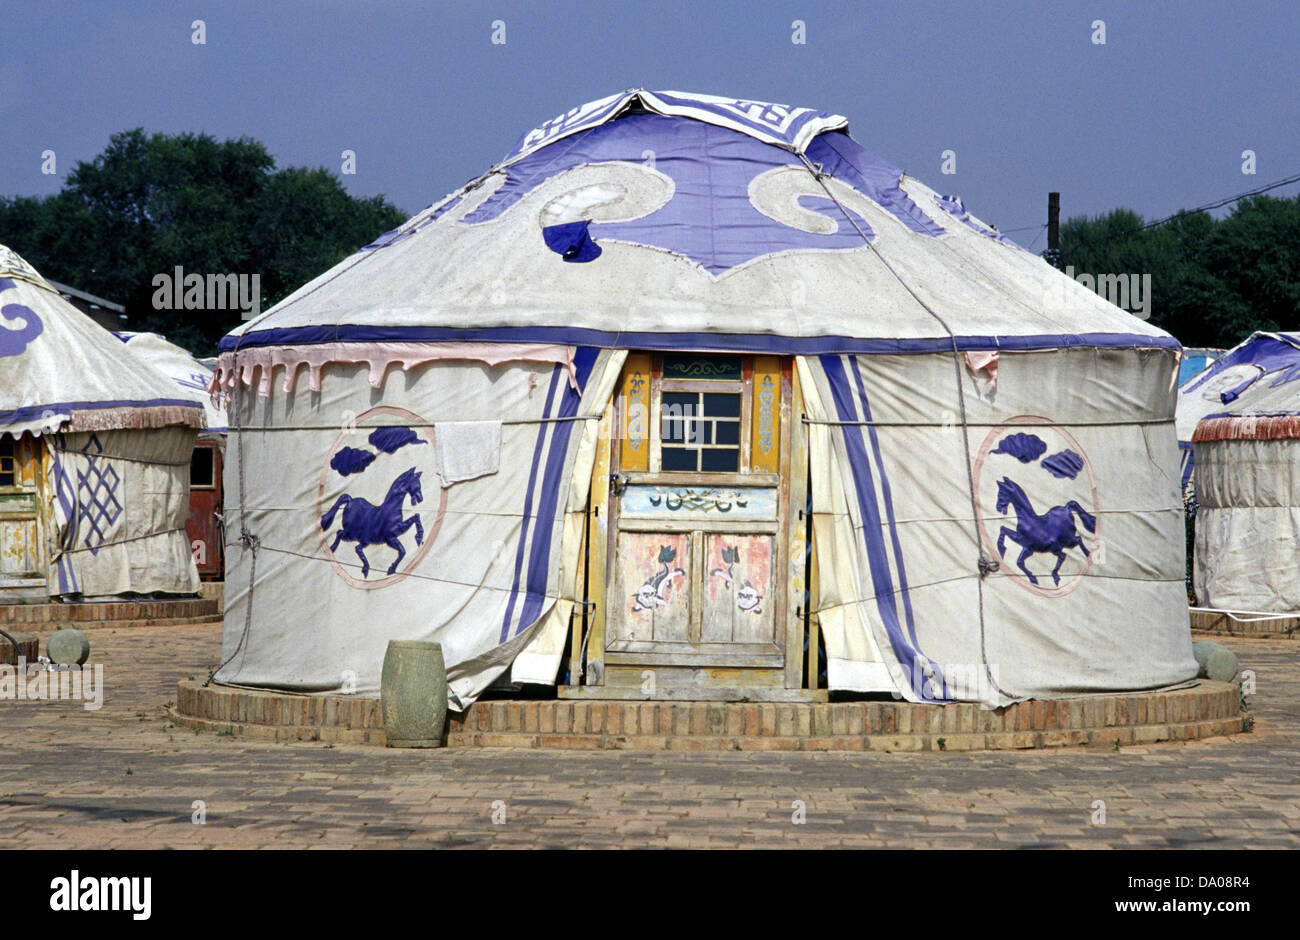 A traditional Mongolian yurt or ger which portable, round tent covered with felt and used as a dwelling by nomads in the steppes of Central Asia. Stock Photo